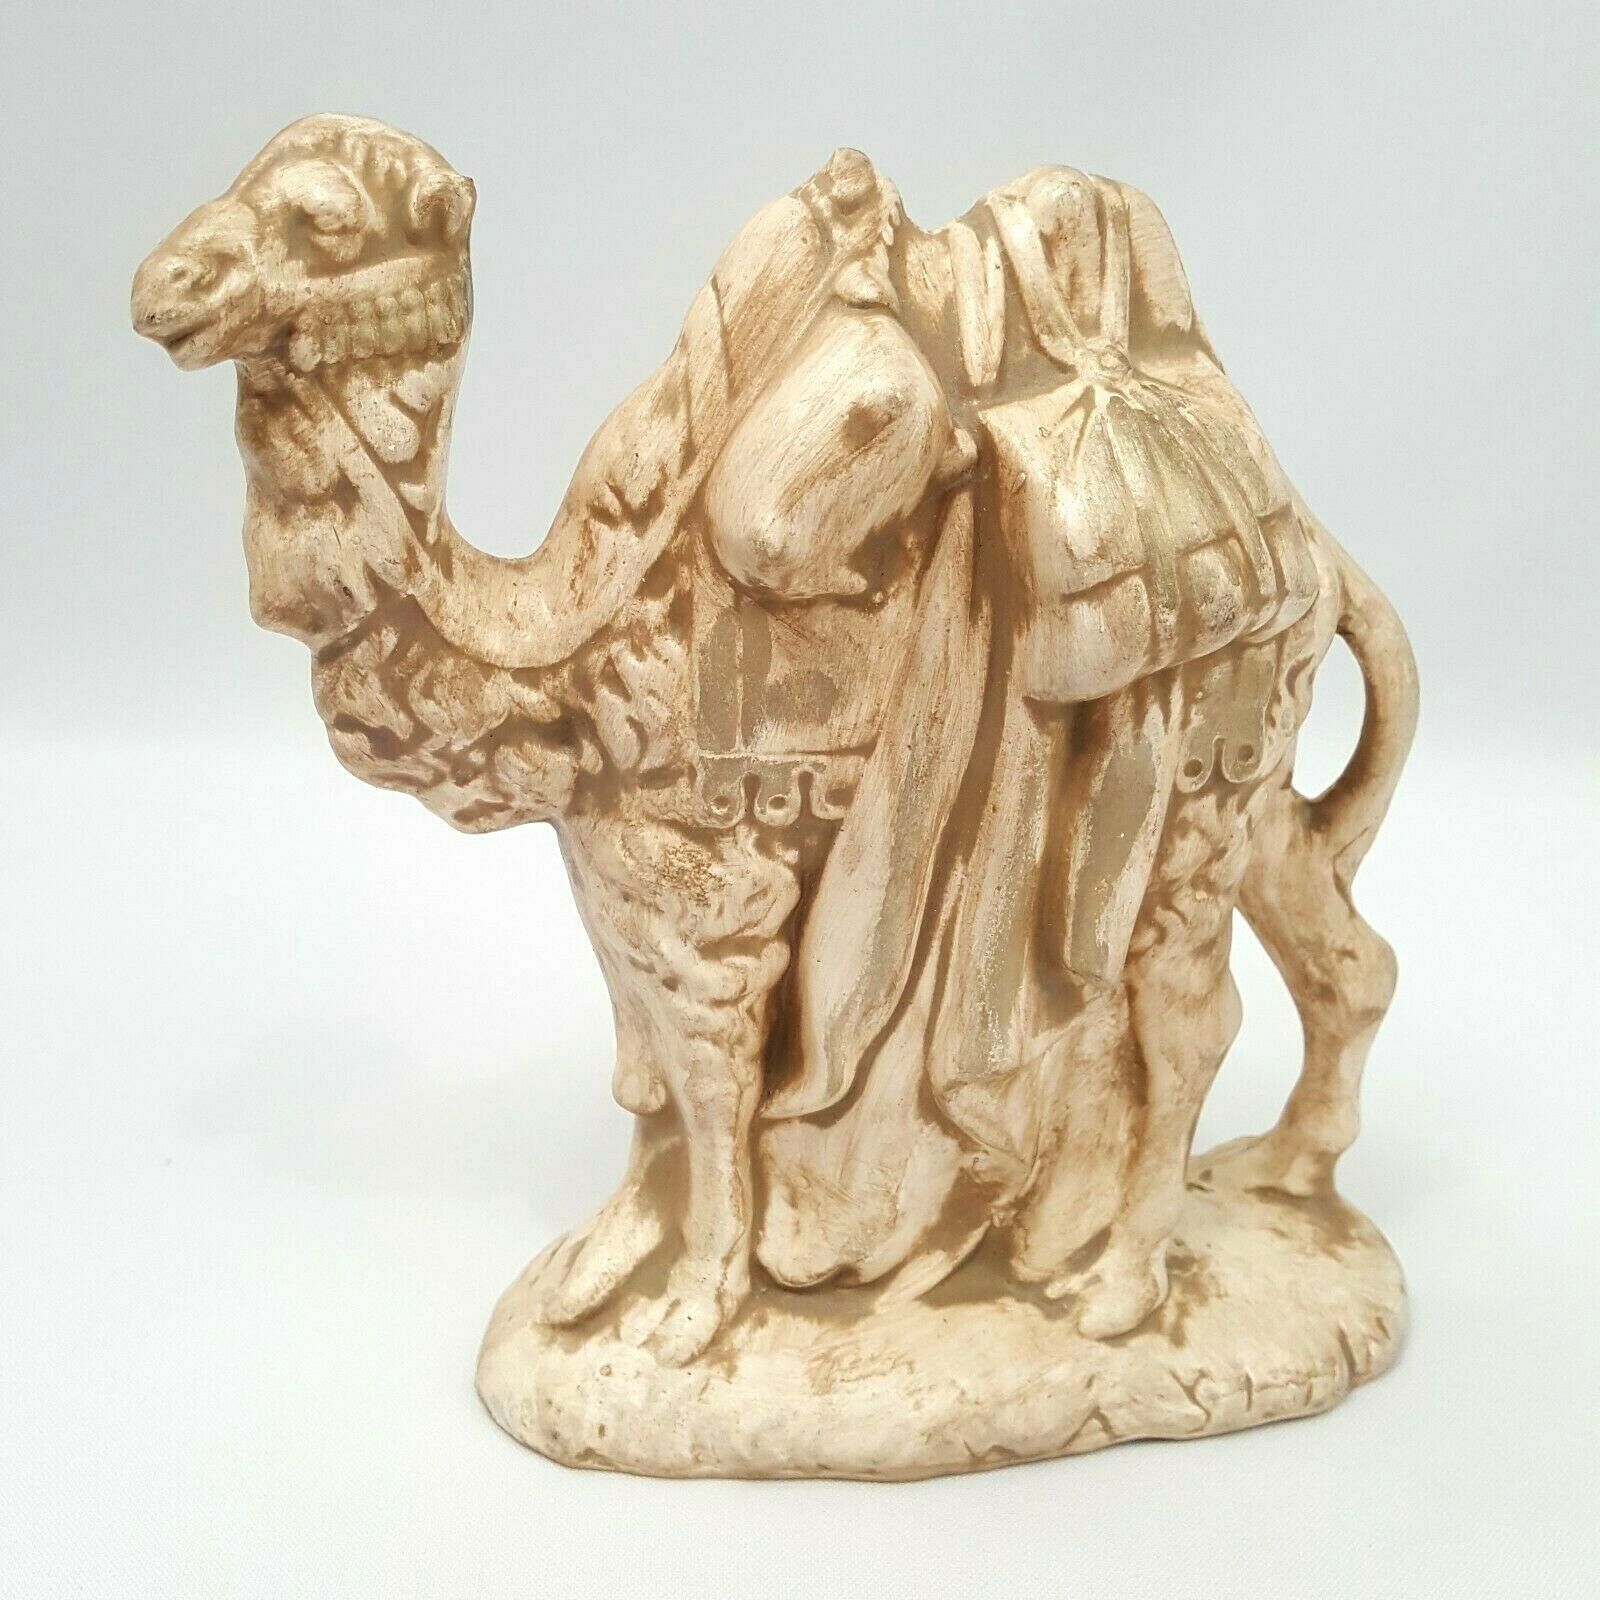 Holland Mold Nativity Replacement Figurines Mary Joseph Camel Shepherds Angels 